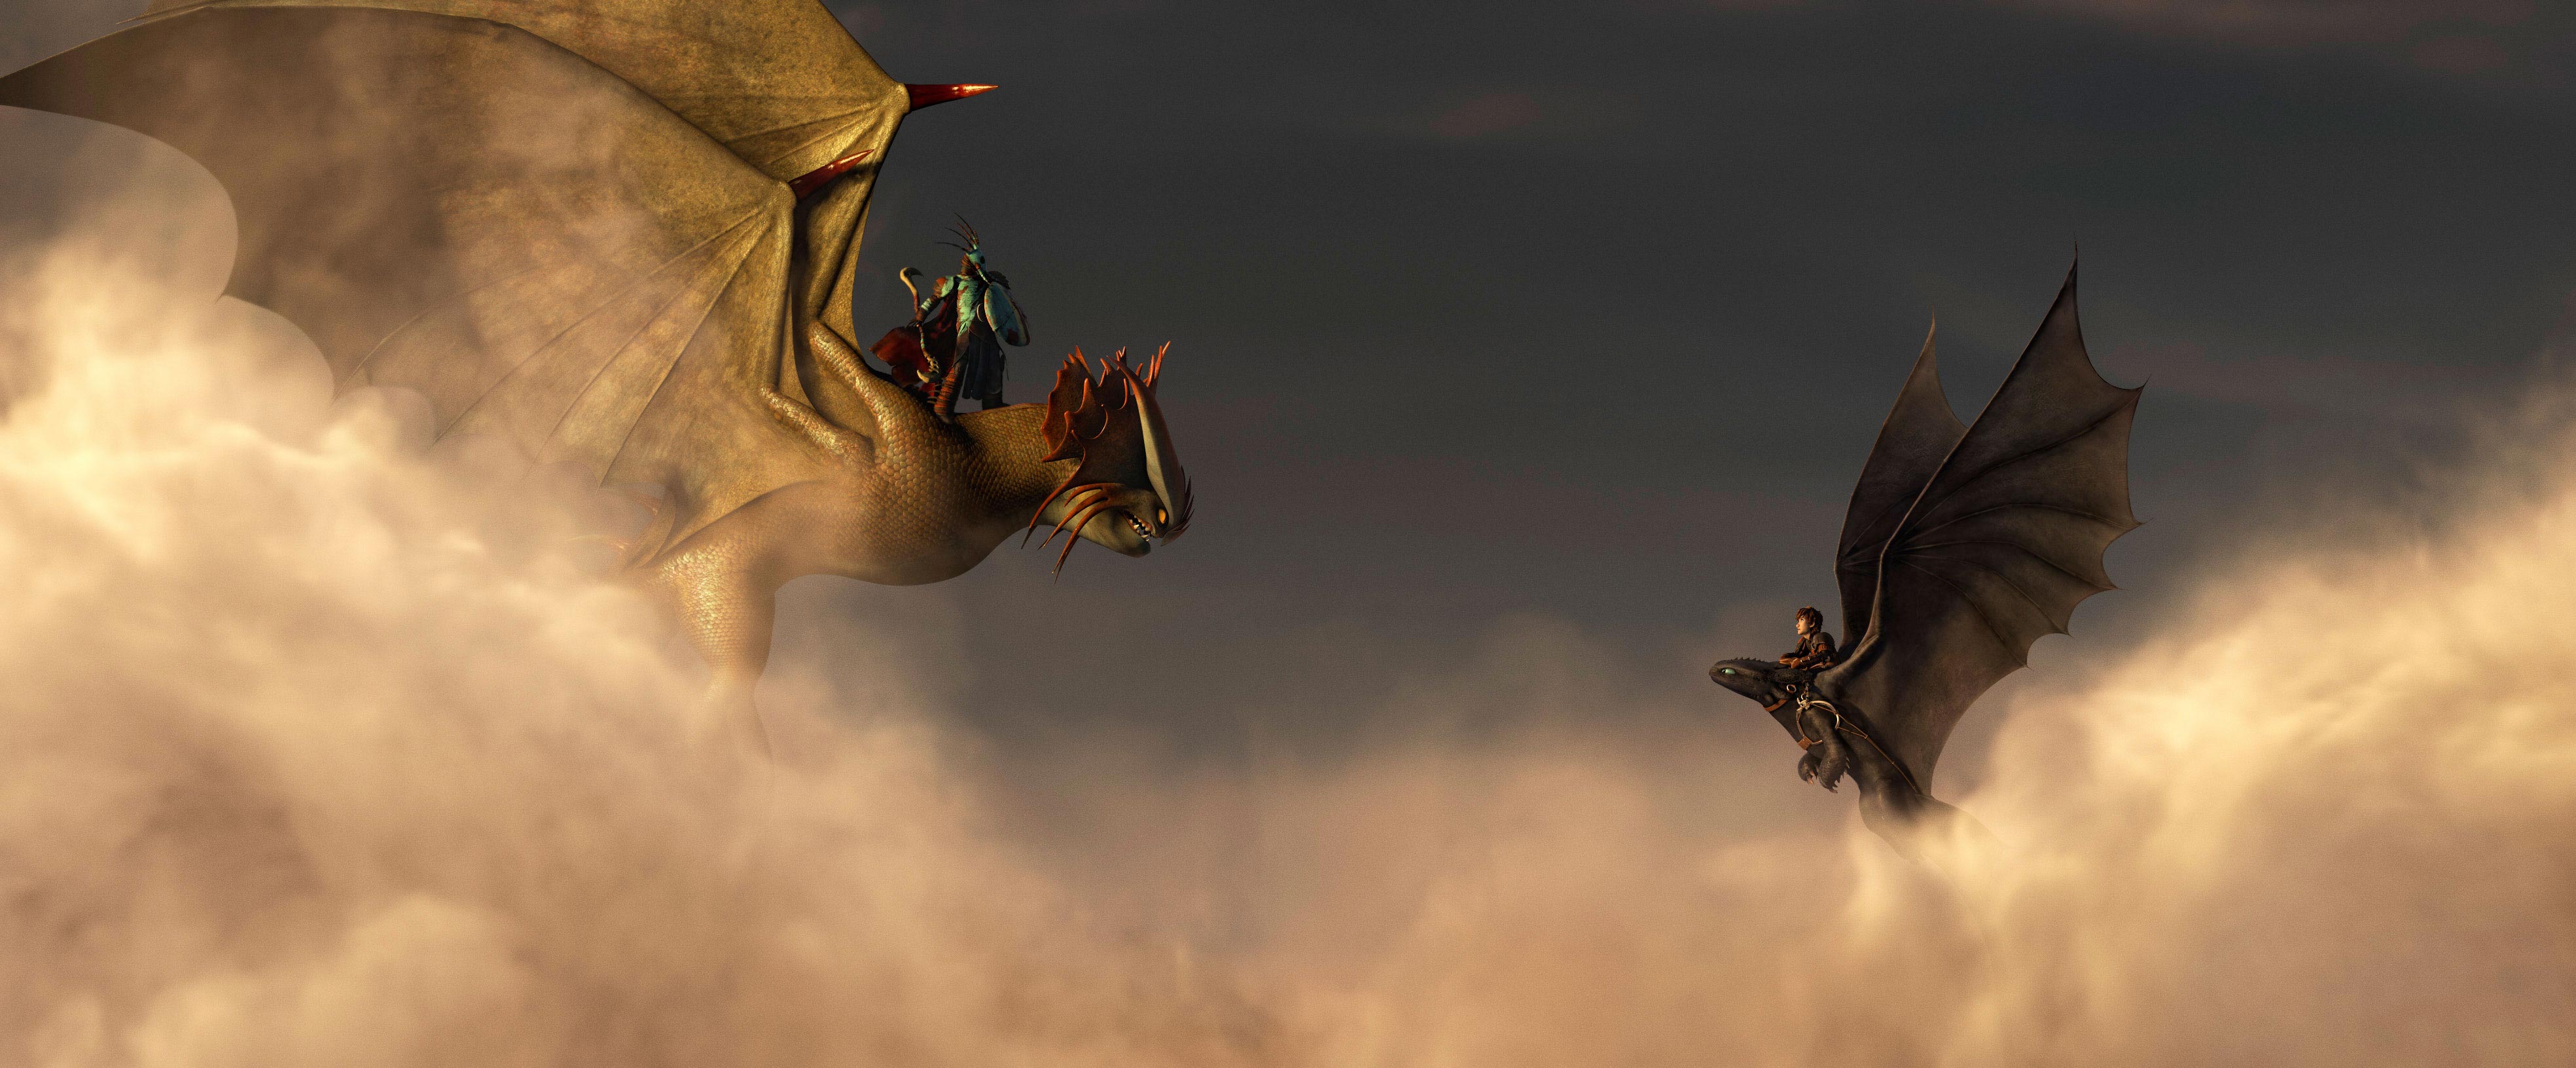 How To Train Your Dragon 2 Wallpaper Hd Collection